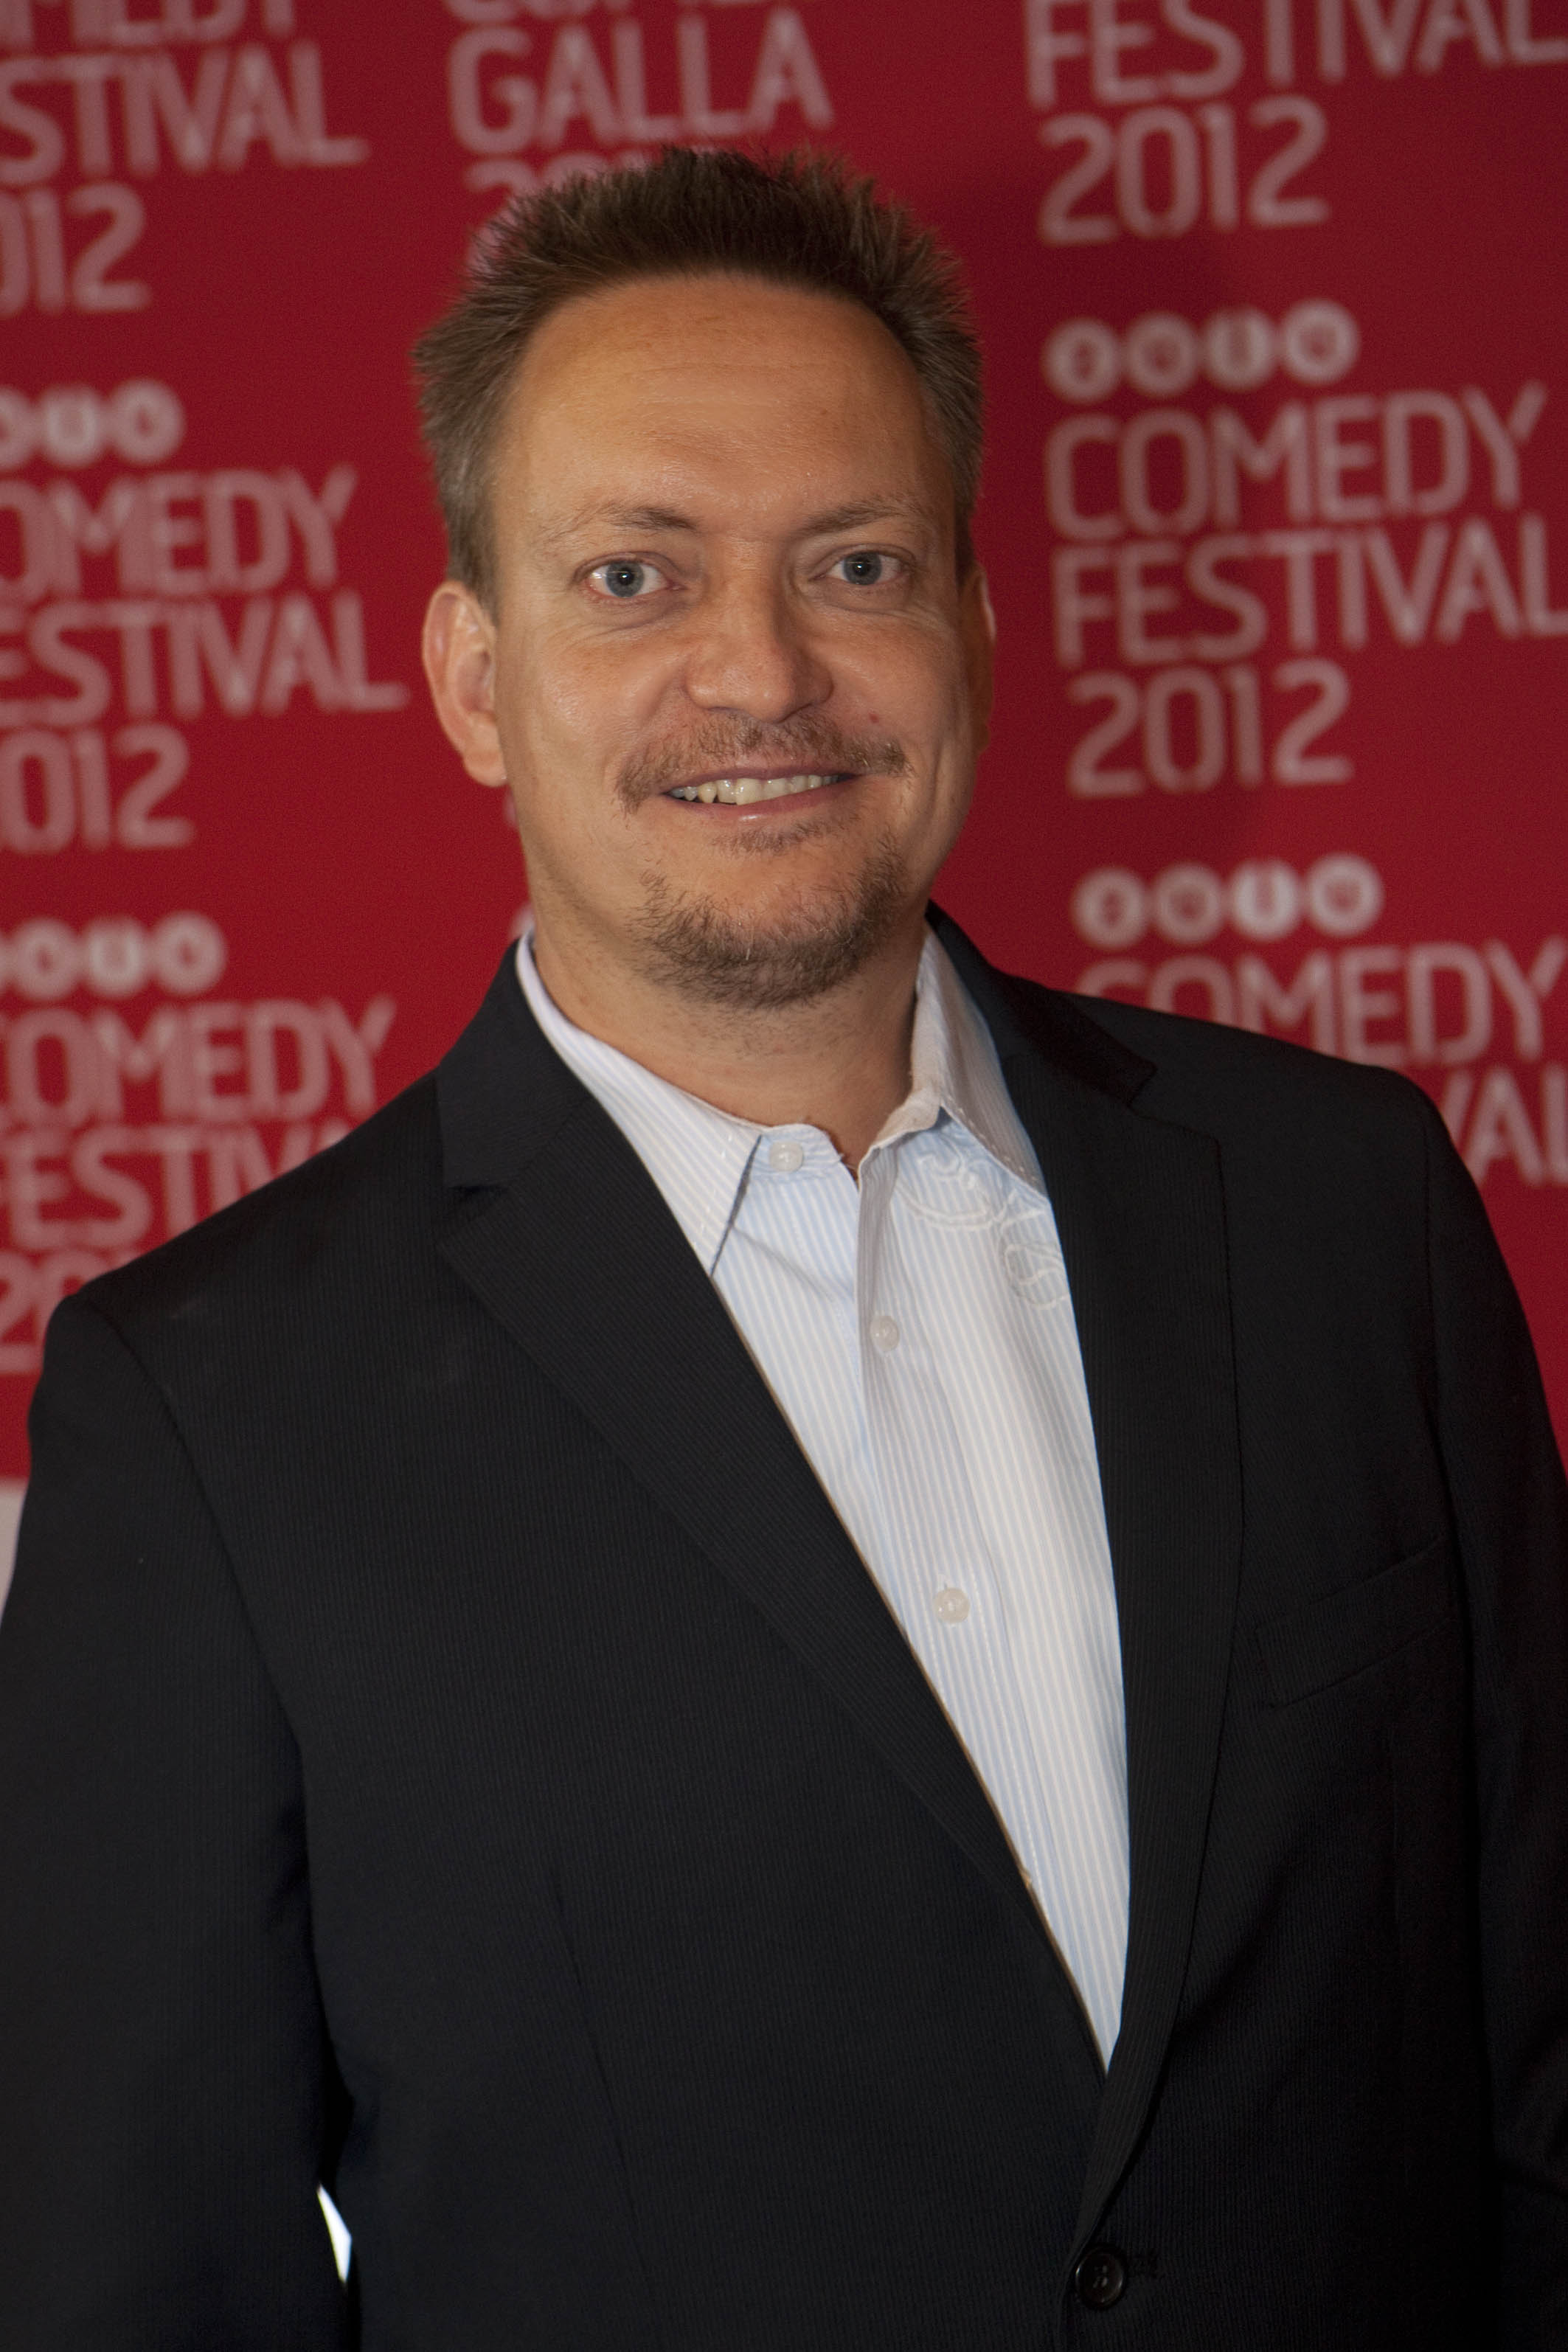 Maansson at the annual Zulu Comedy Gala 2012